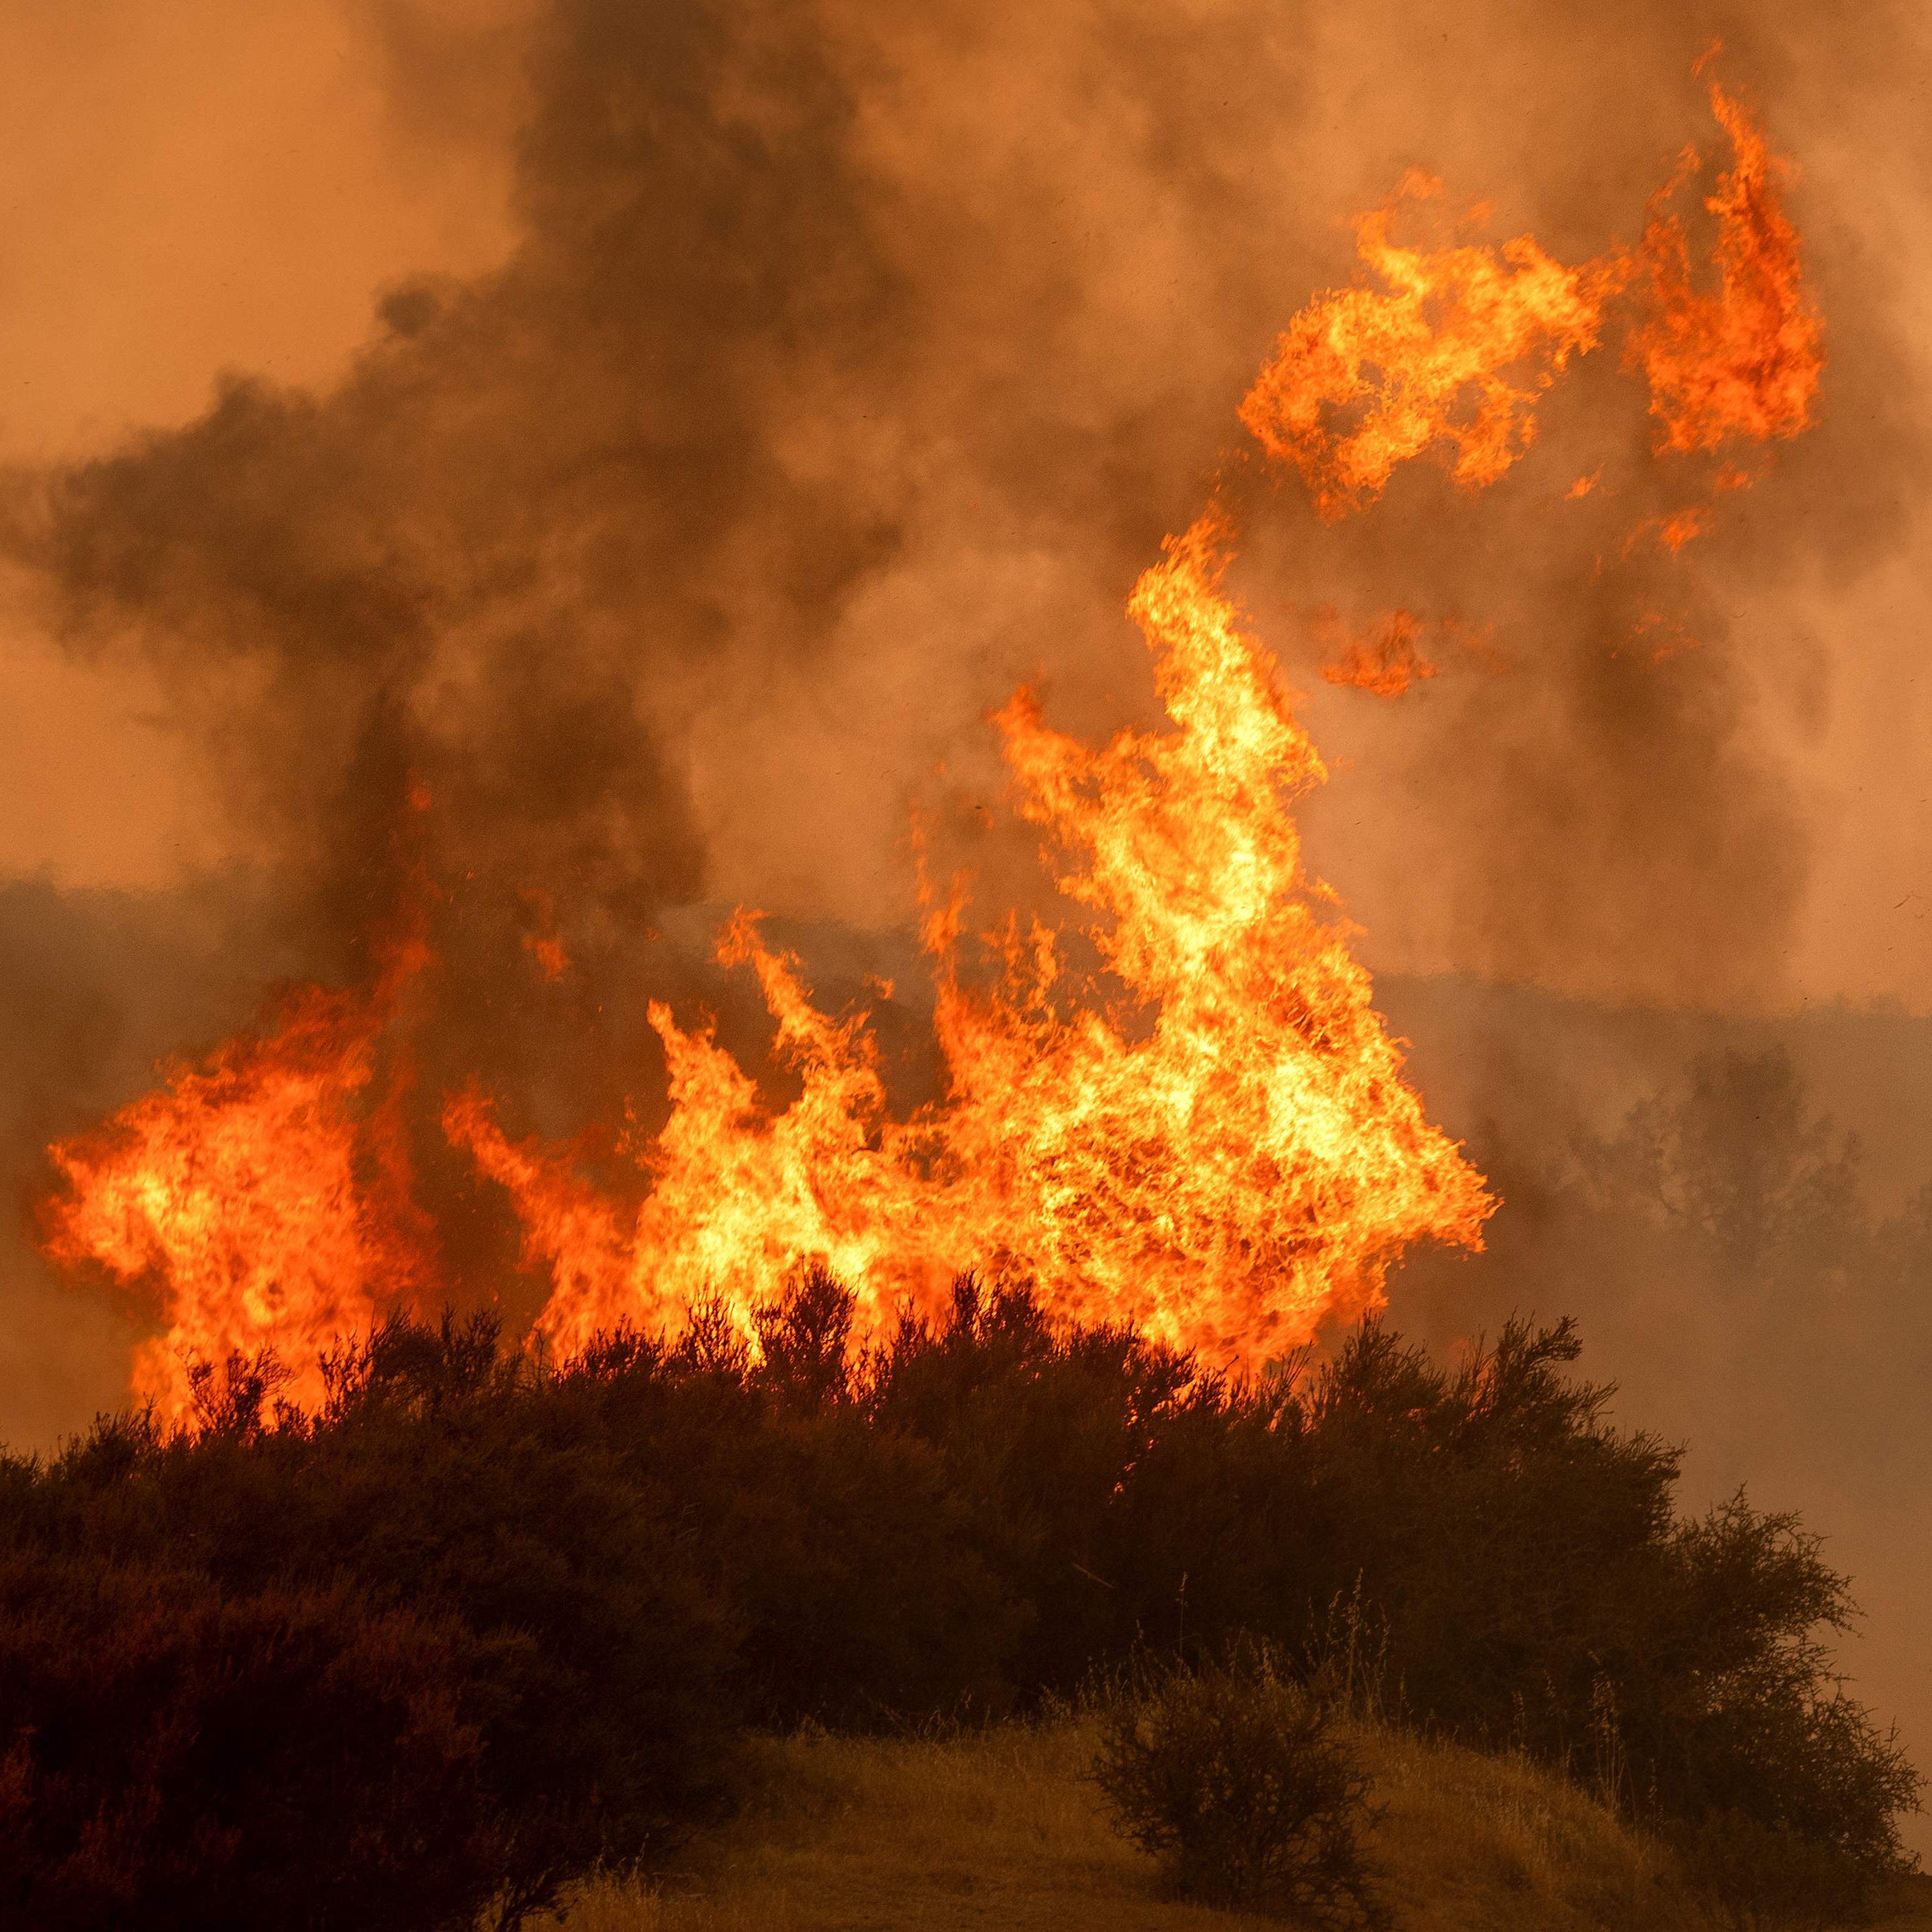 Flames leap above a vehicle on High Valley Rd. as the Ranch Fire, part of the Mendocino Complex Fire, burns near Clearlake Oaks, Calif., on August 5, 2018.  Several thousand people have been evacuated as various fires swept across the state, although 